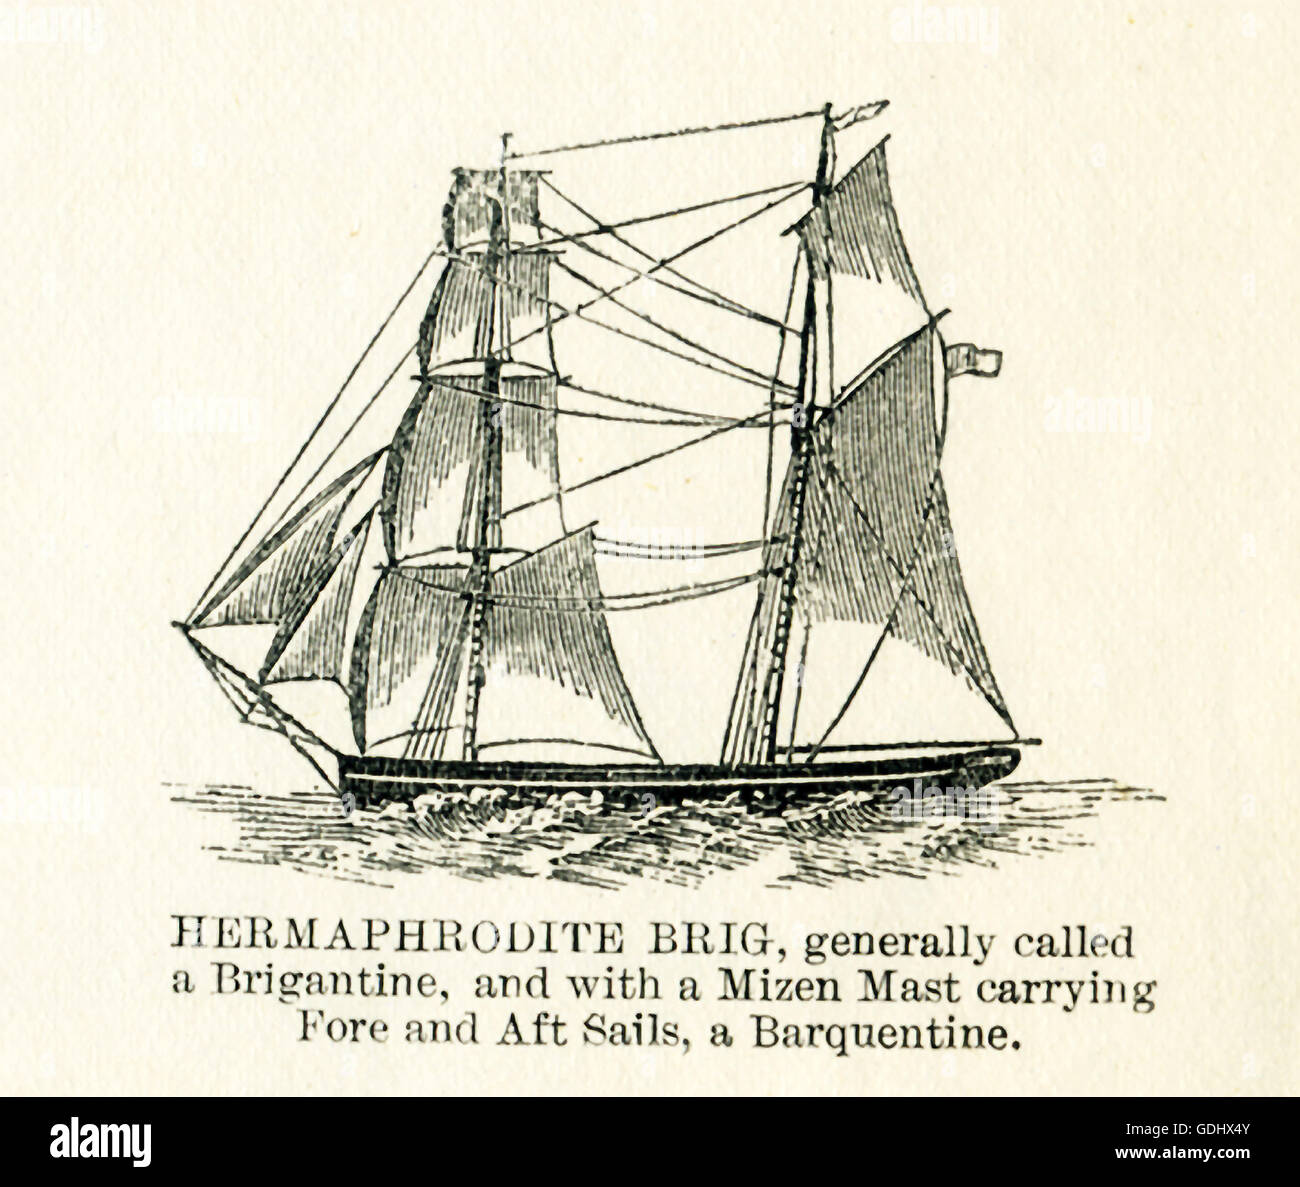 The vessel pictured in this 19th-century drawing is a hermaphrodite brig. Stock Photo